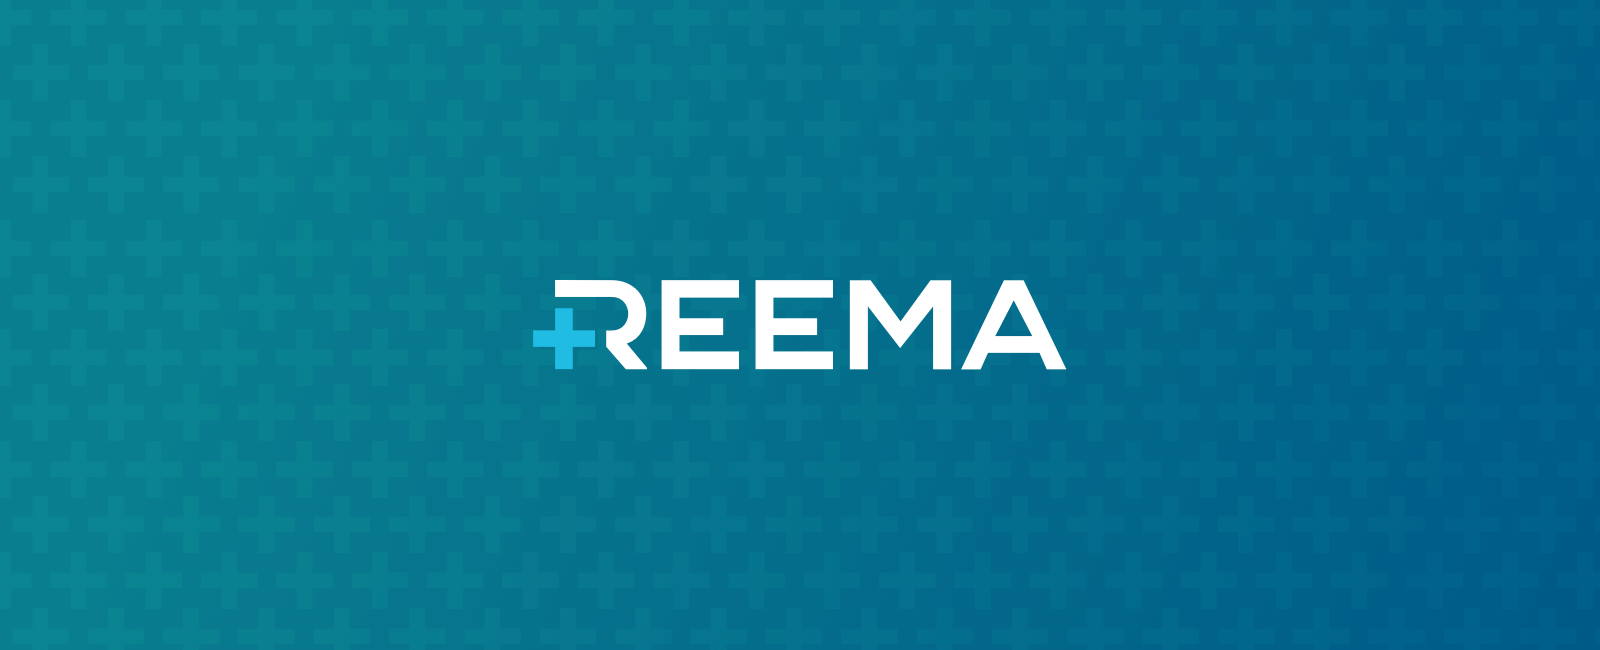 Reema Health Secures $8 Million in Seed Funding Round